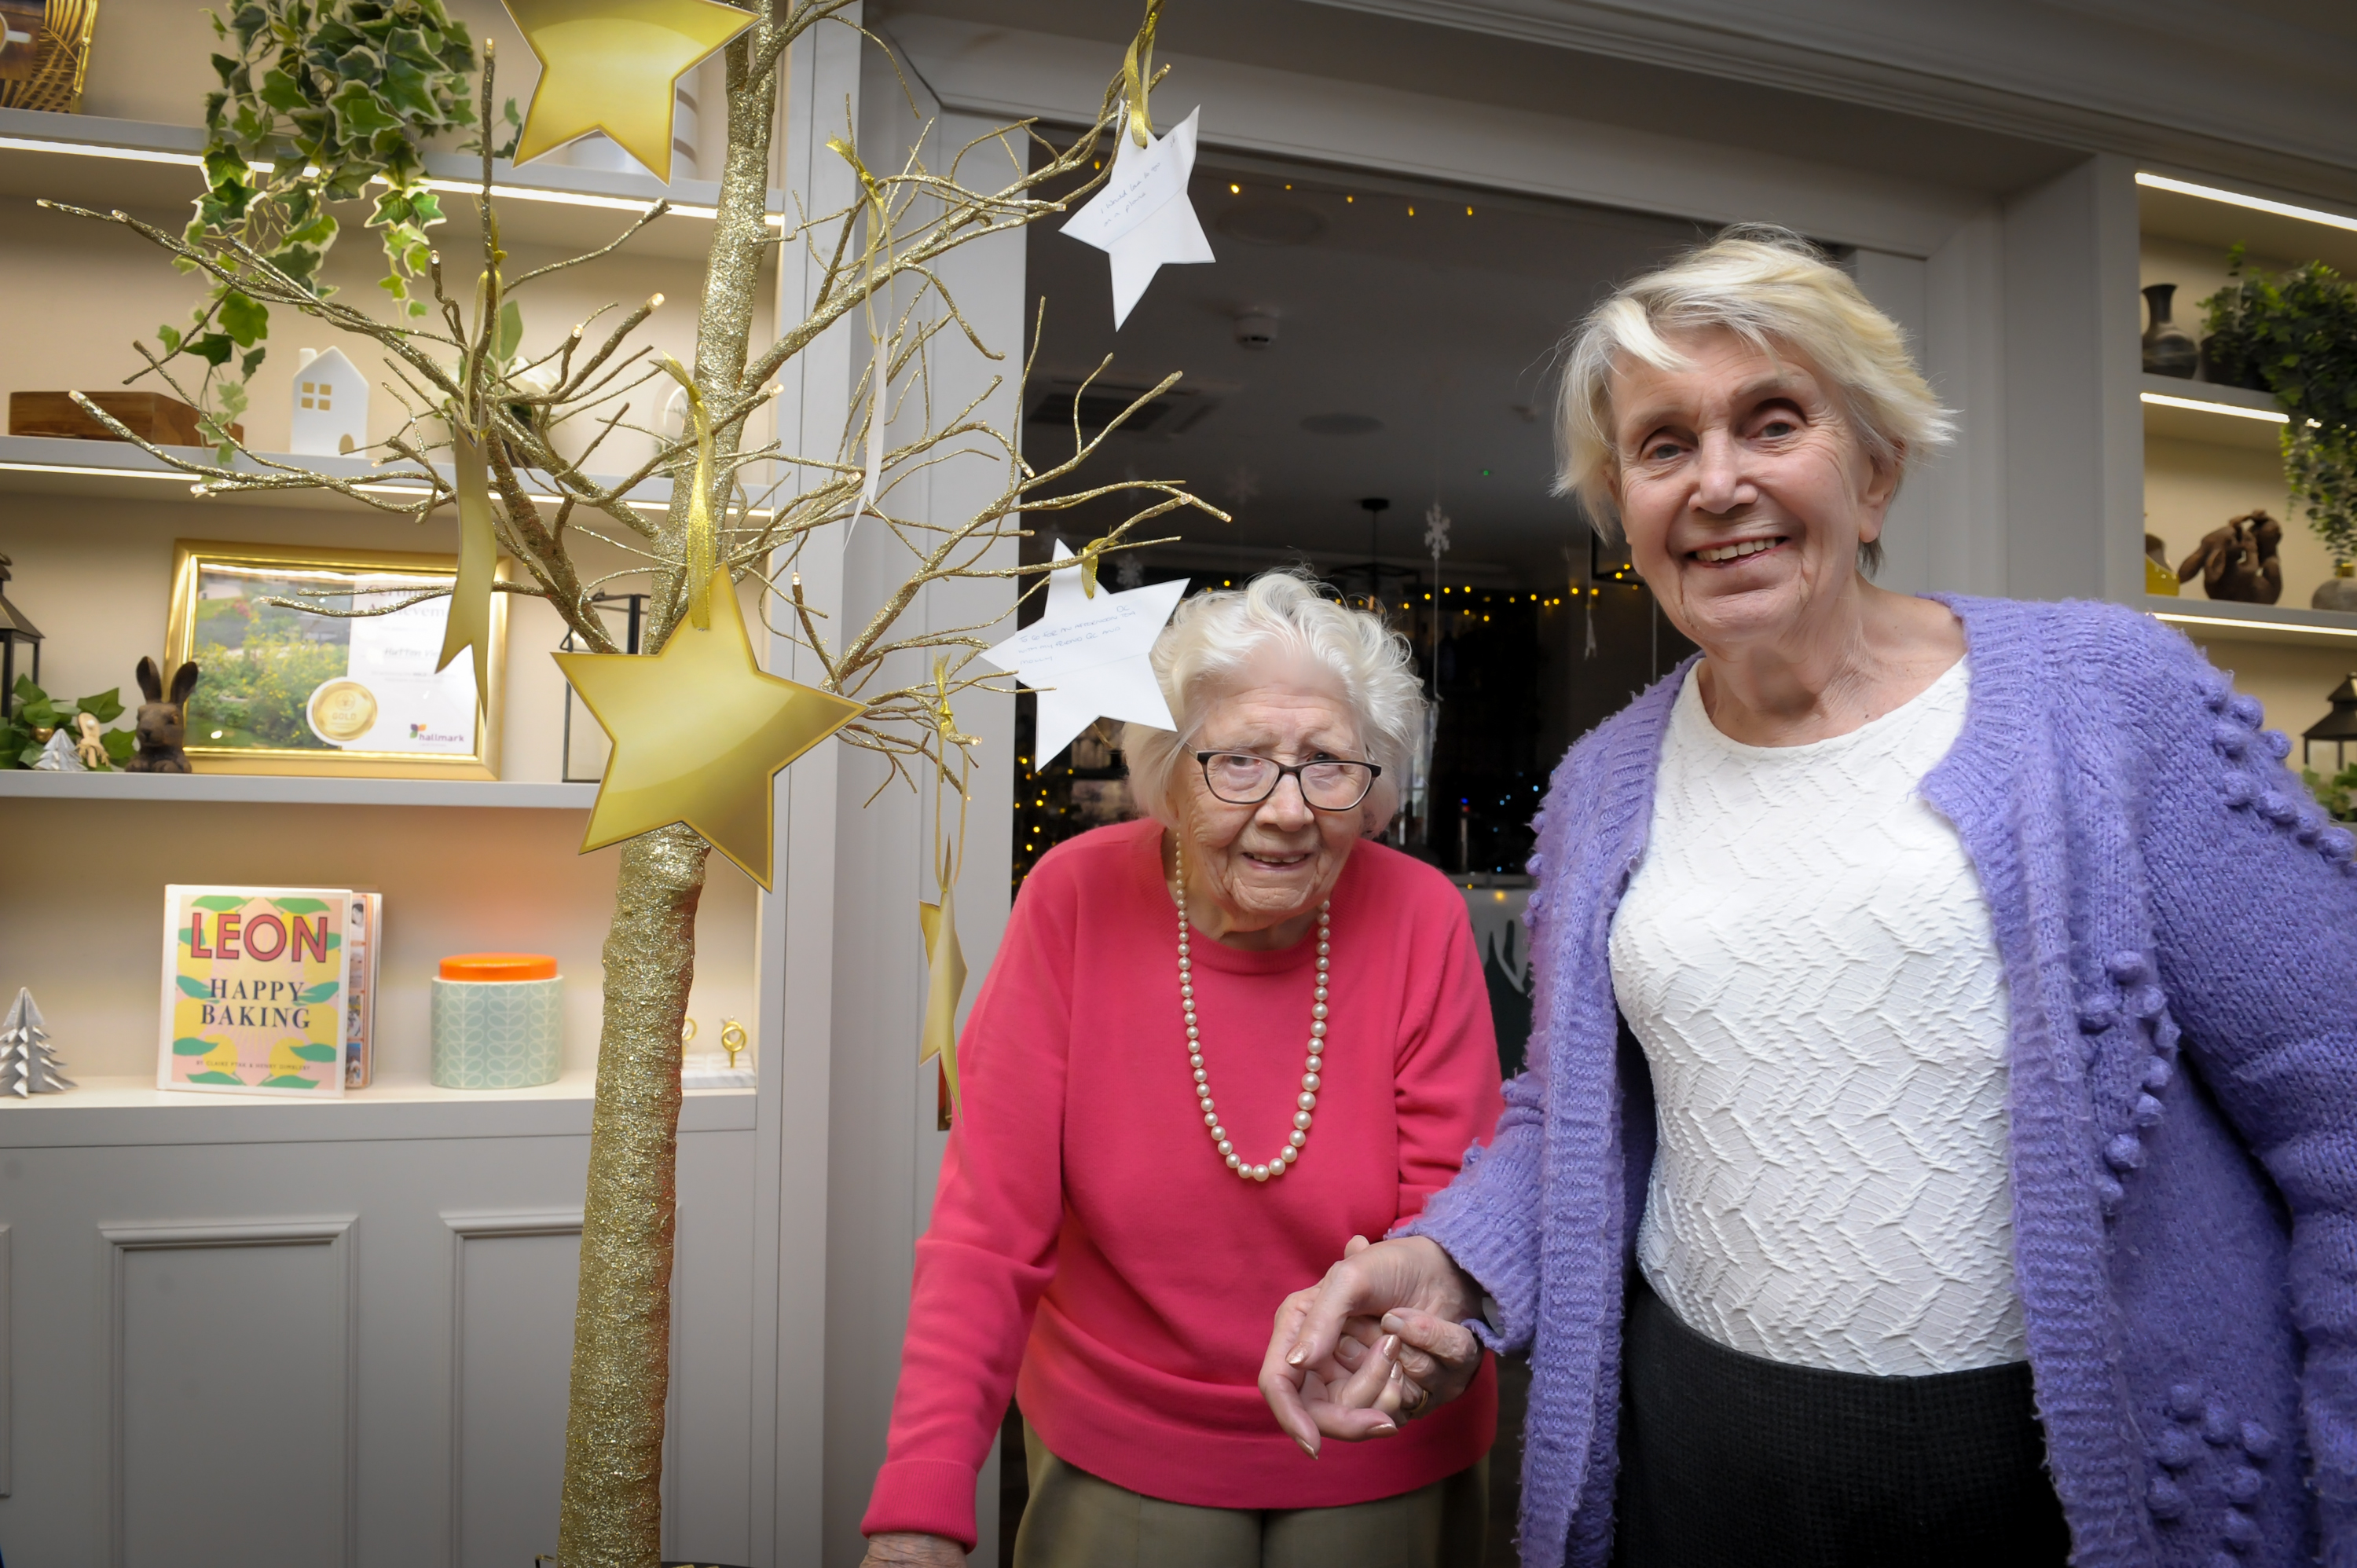 Residents at Hutton View care home hang wishes on a Christmas tree (Hutton View/PA)